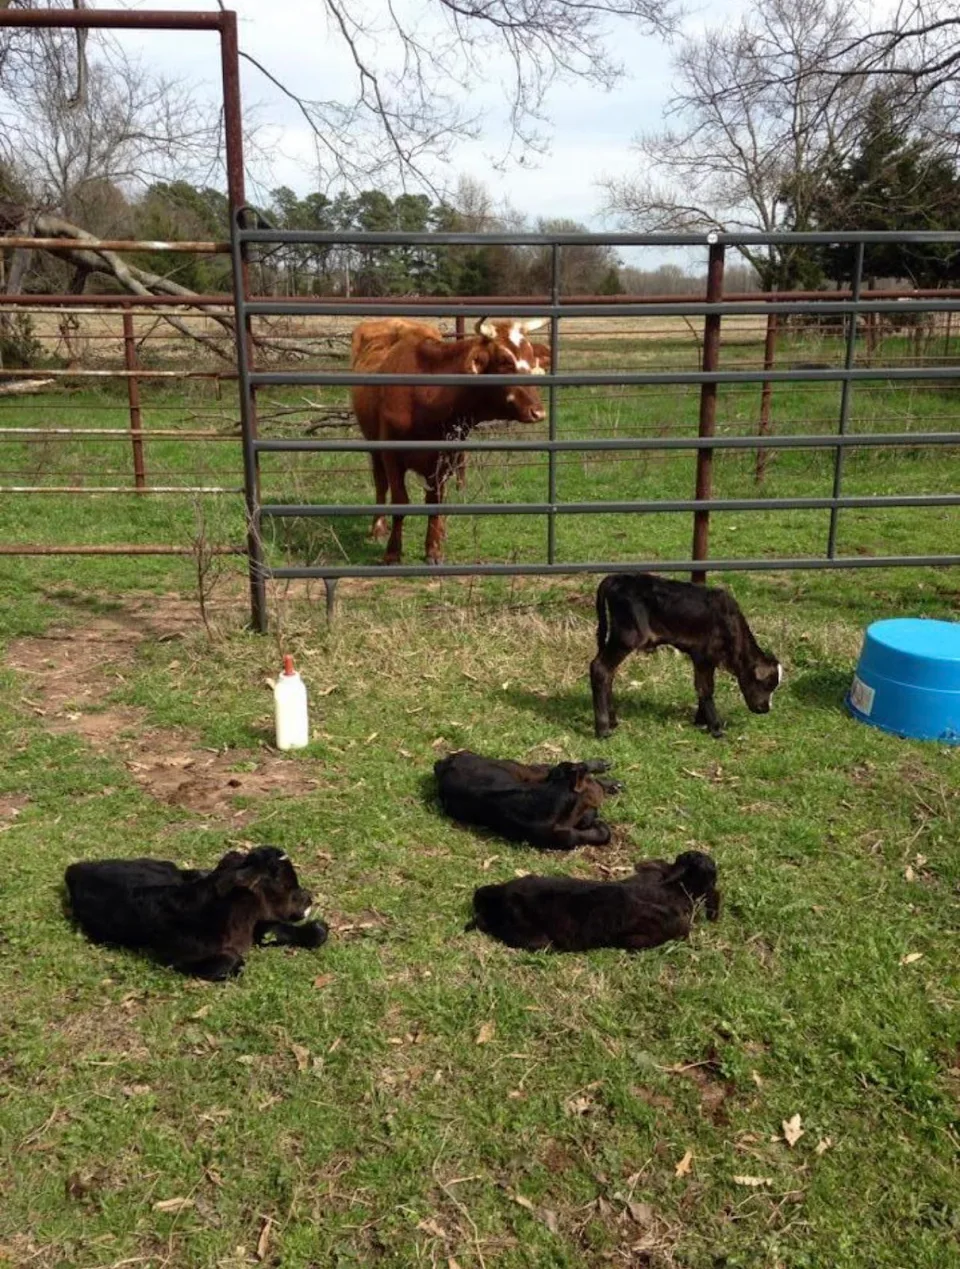 A cow gave birth to 4 calves and they were named Eeny, Meeny, Miny and Moo.